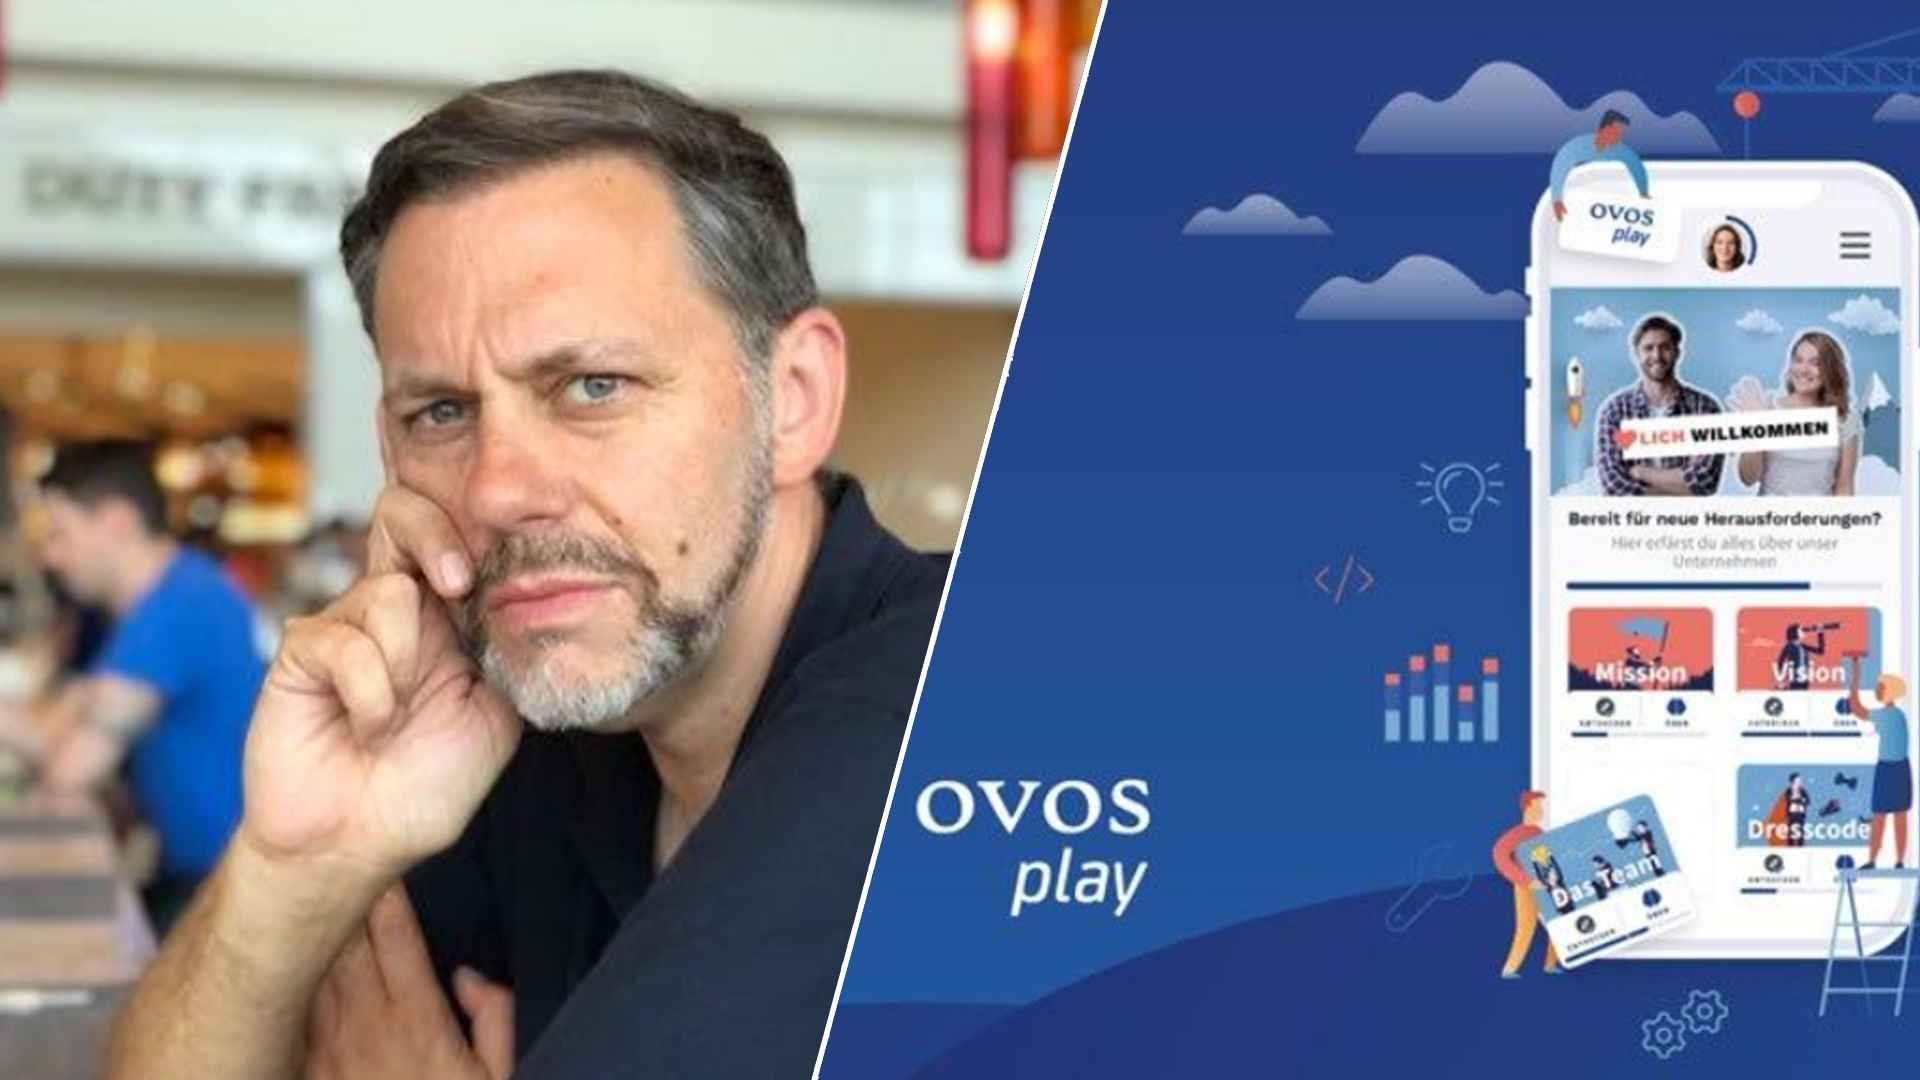 Wegesrand and Edtech Provider ovos Sign Cooperation Agreement